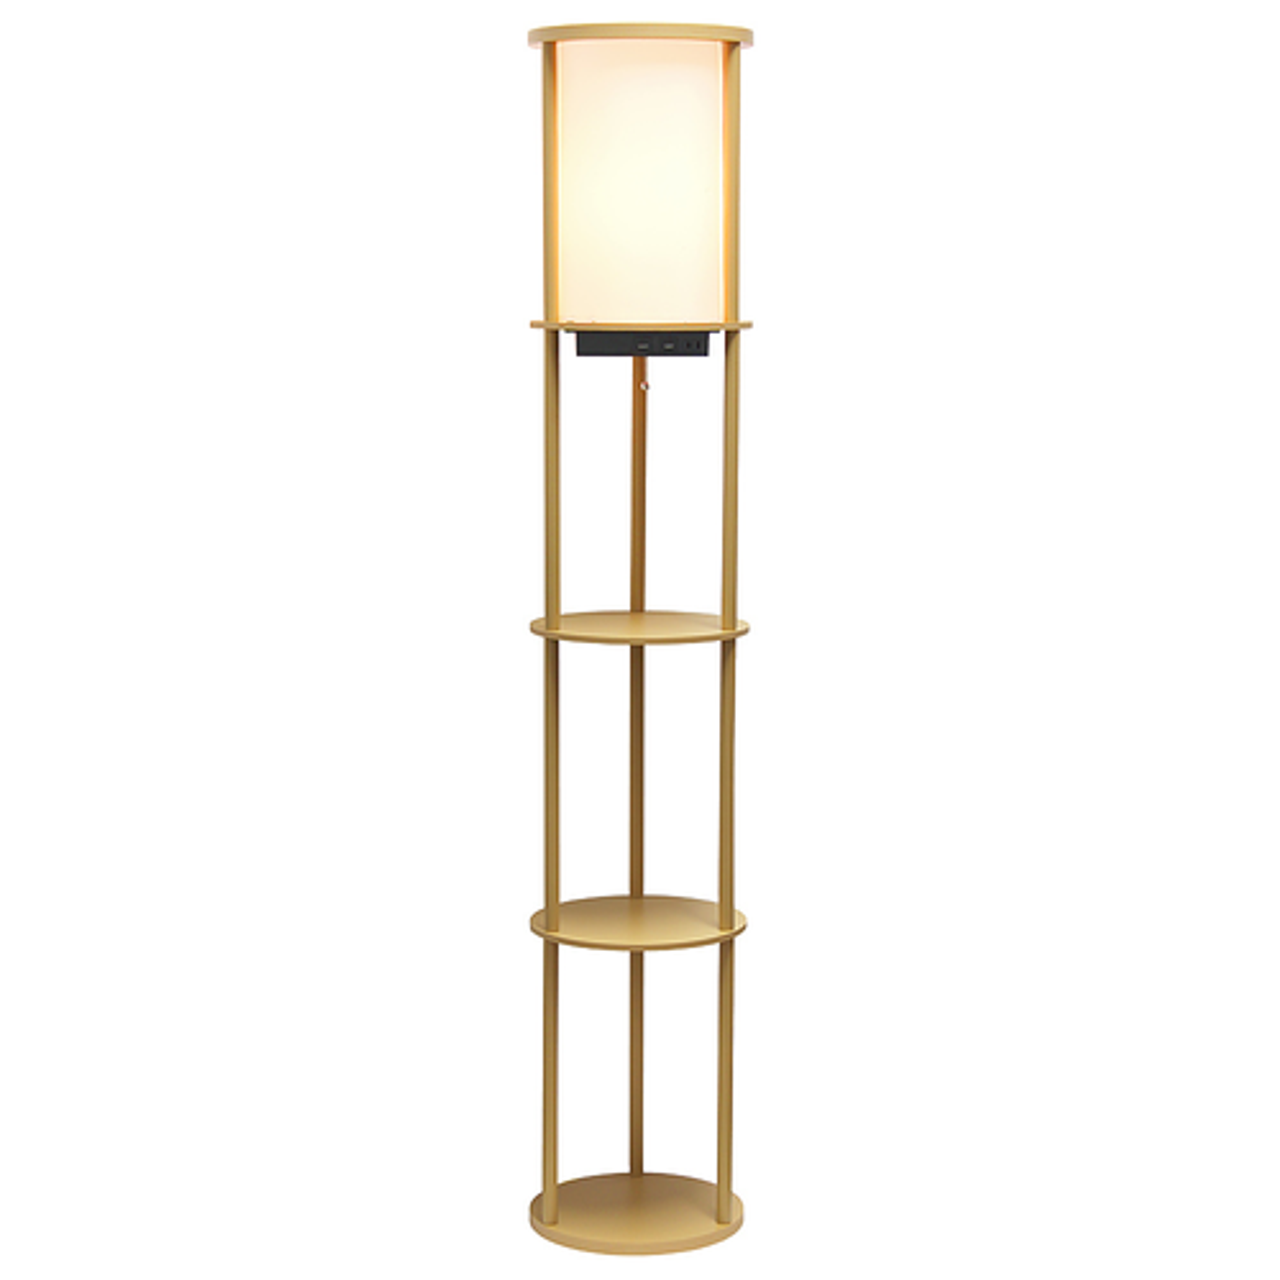 Simple Designs Round Etagere Storage Floor Lamp with 2 USB, 1 Outlet - Tan